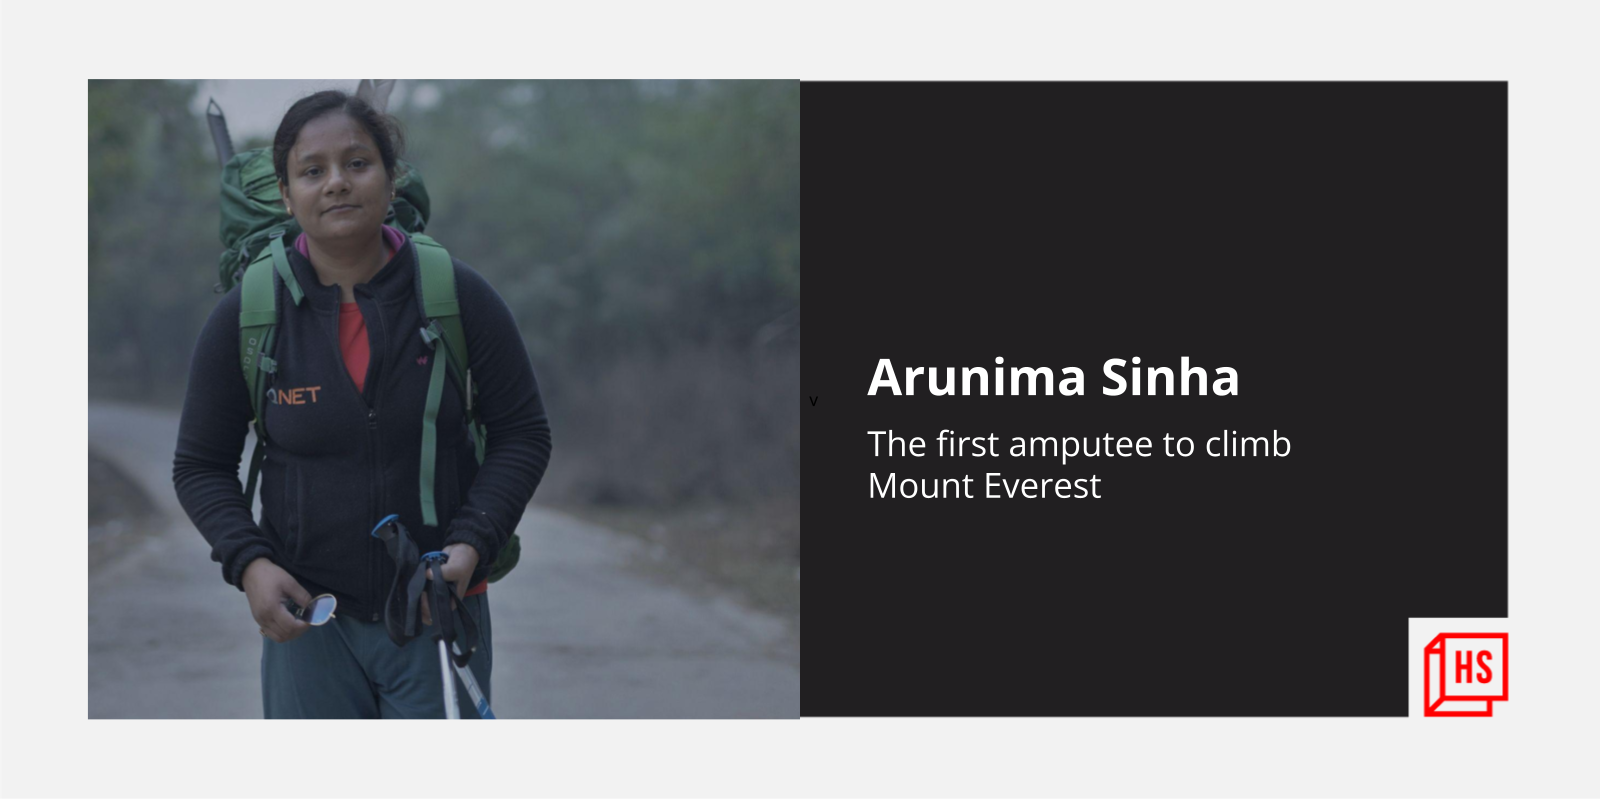 [Women’s Day] Scaling the peak: how Arunima Sinha survived amputation, climbed Mount Everest and other mountains